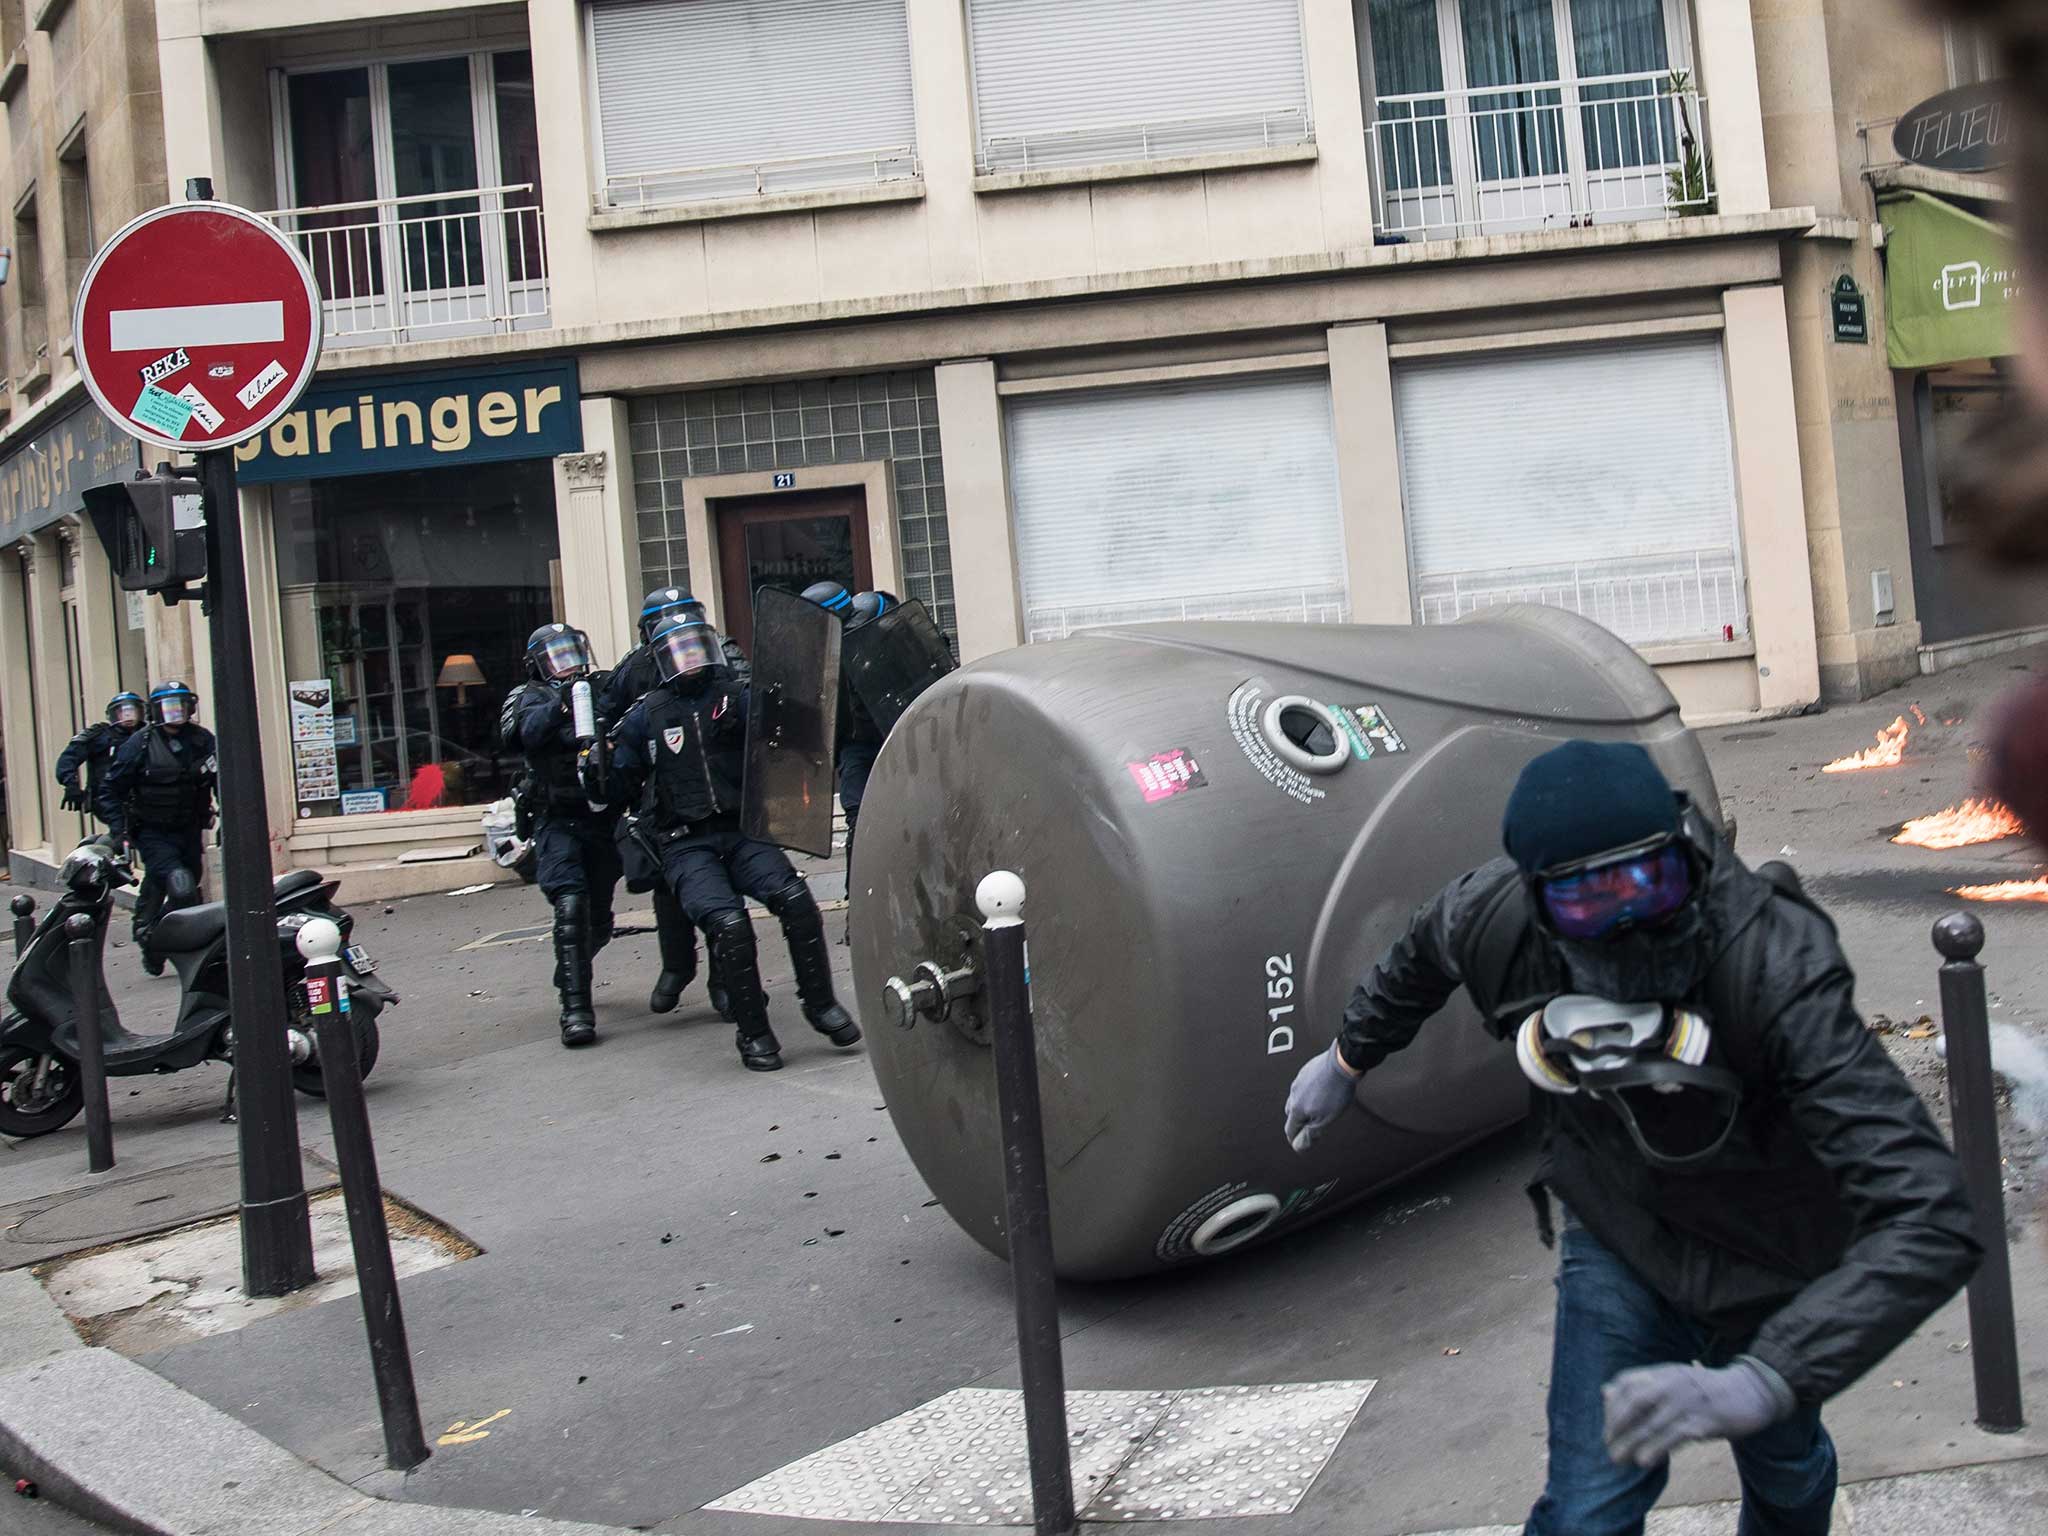 Hooded youths had running battles with police in Paris